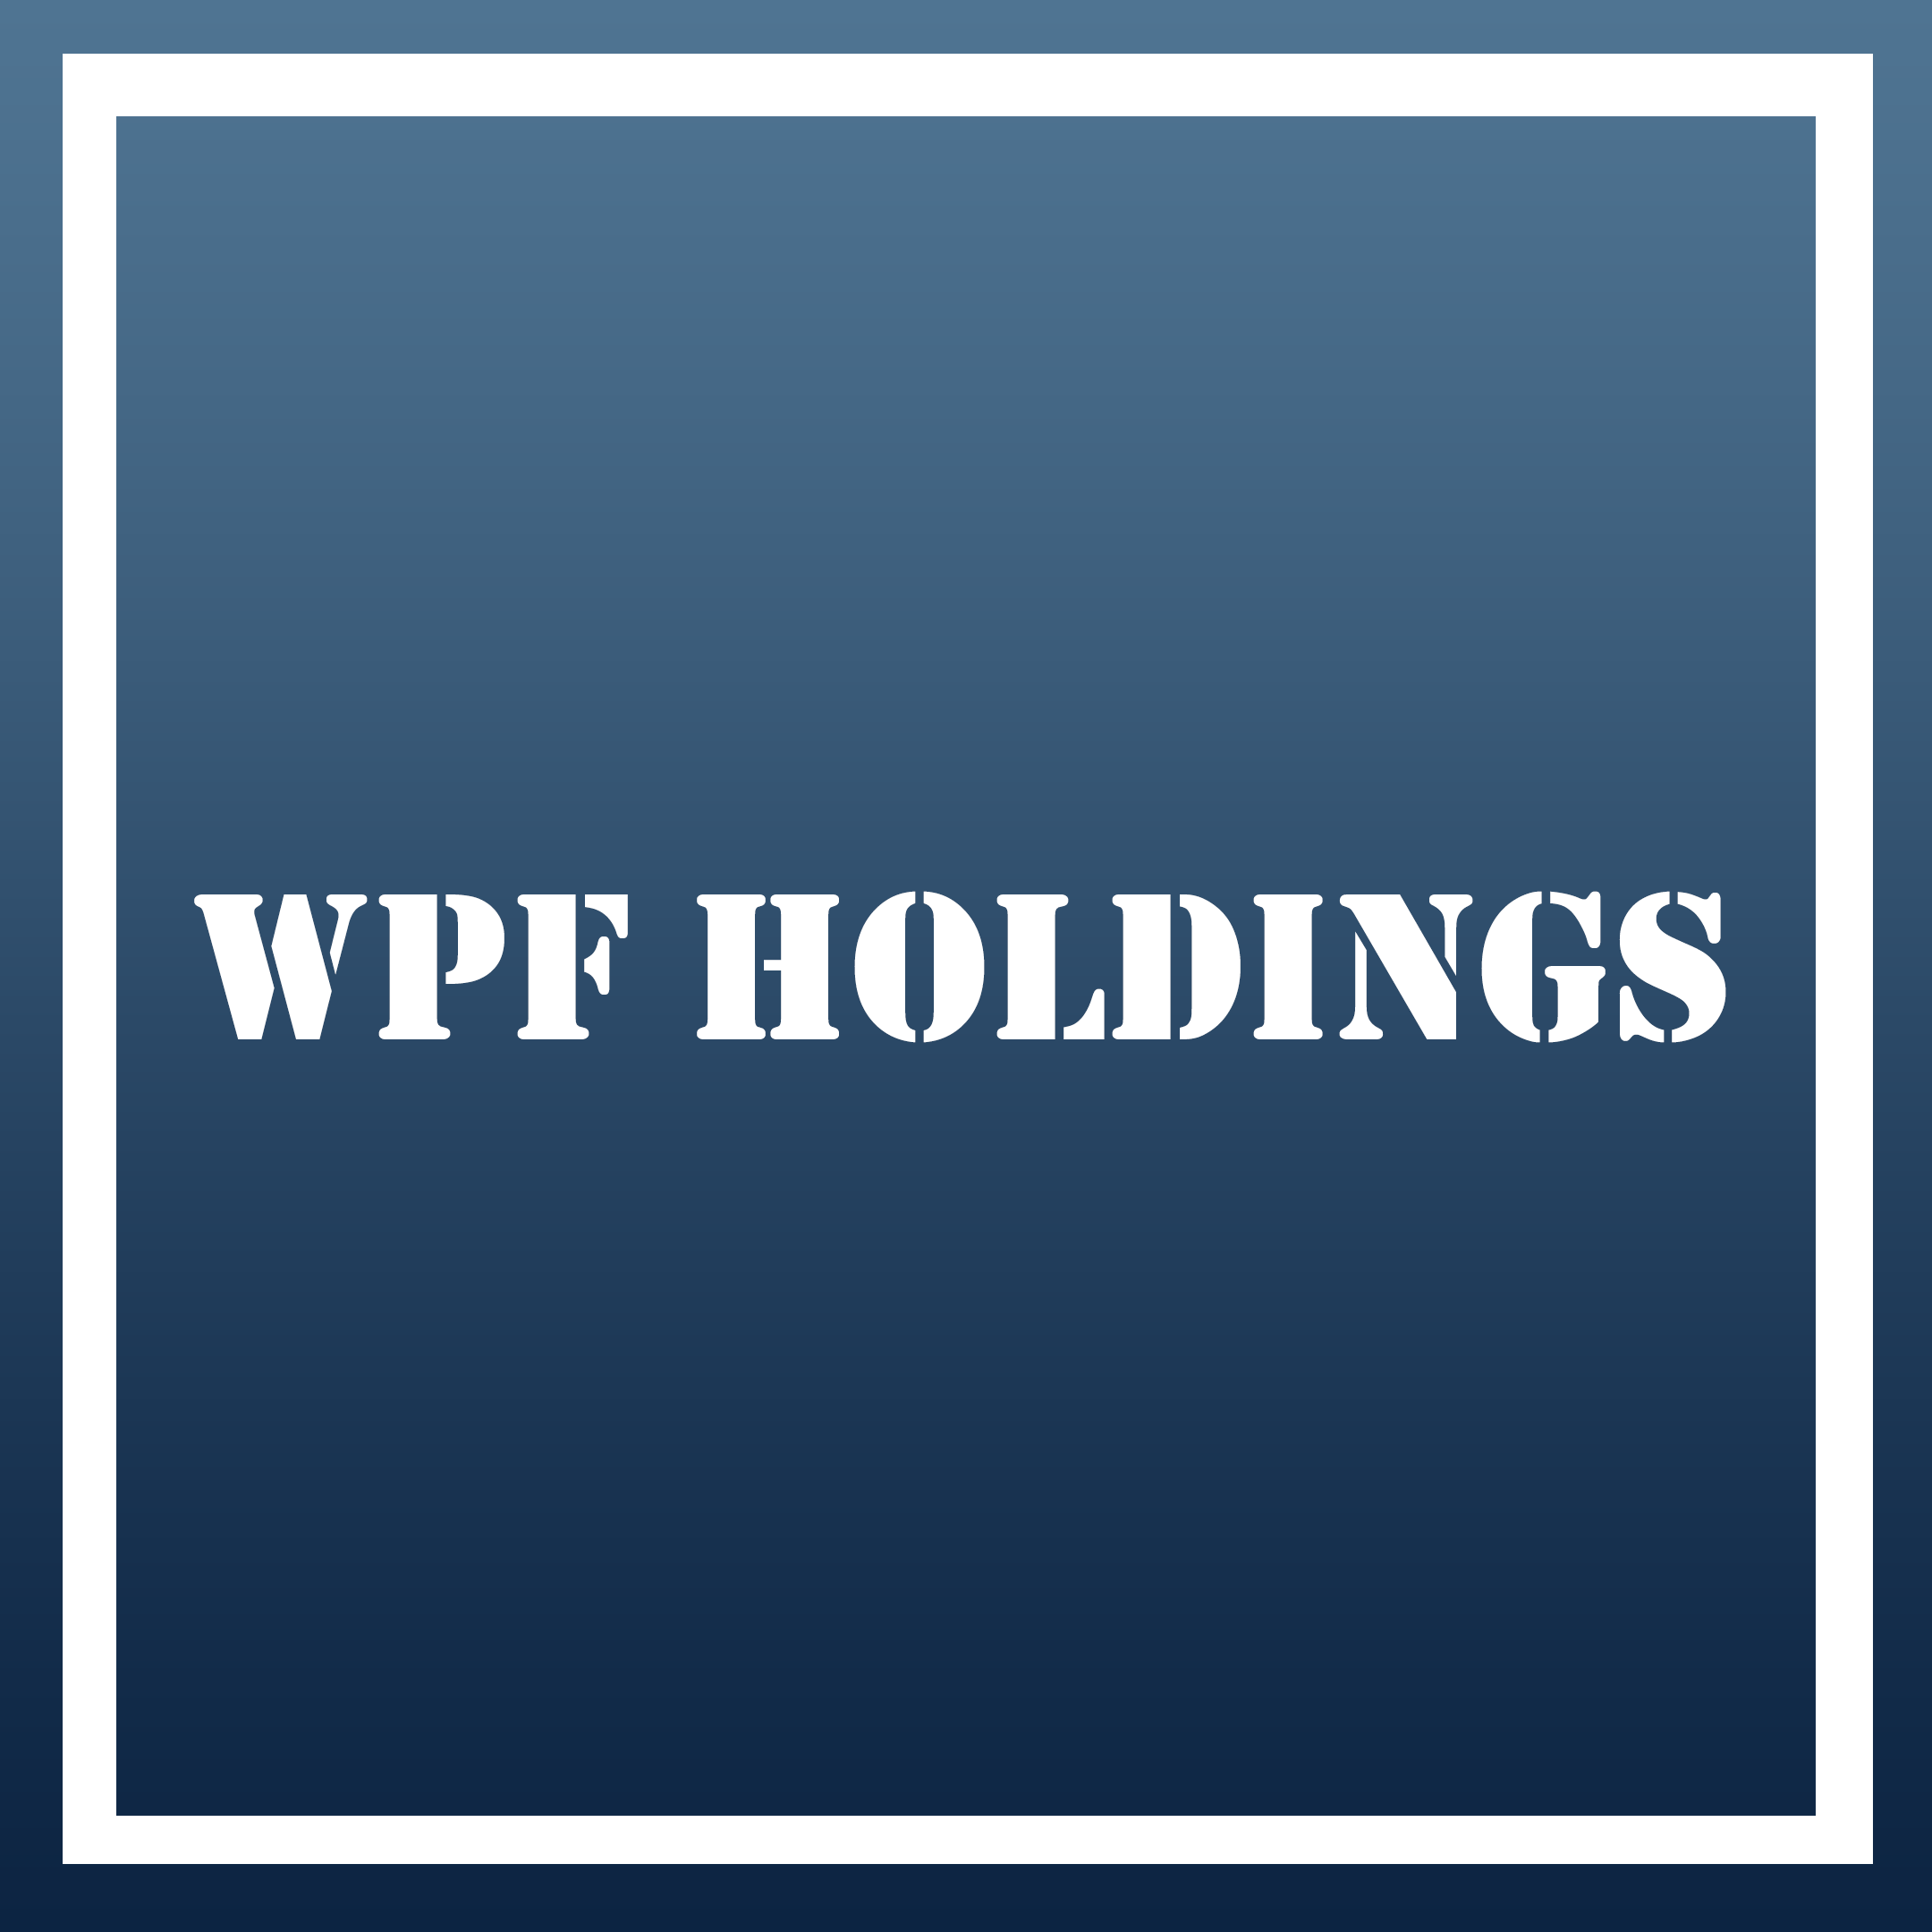 WPF HOLDINGS.png